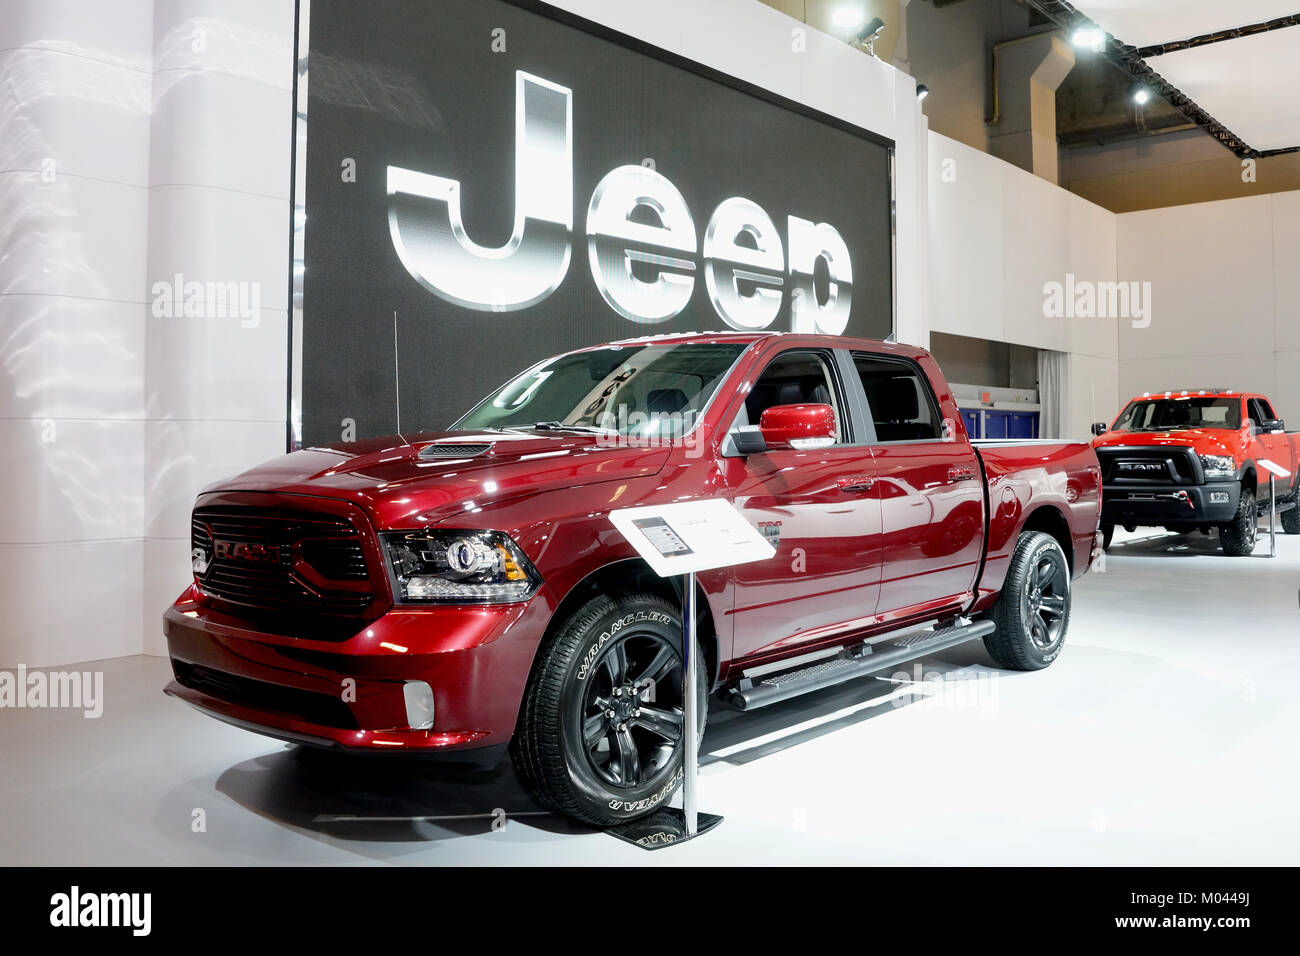 Montreal, Canada. 18th Jan, 2018. Dodge Ram pick-up truck at the Jeep/Dodge  display at the Montreal Auto show.Credit:Mario Beauregrad/Alamy Live News  Stock Photo - Alamy